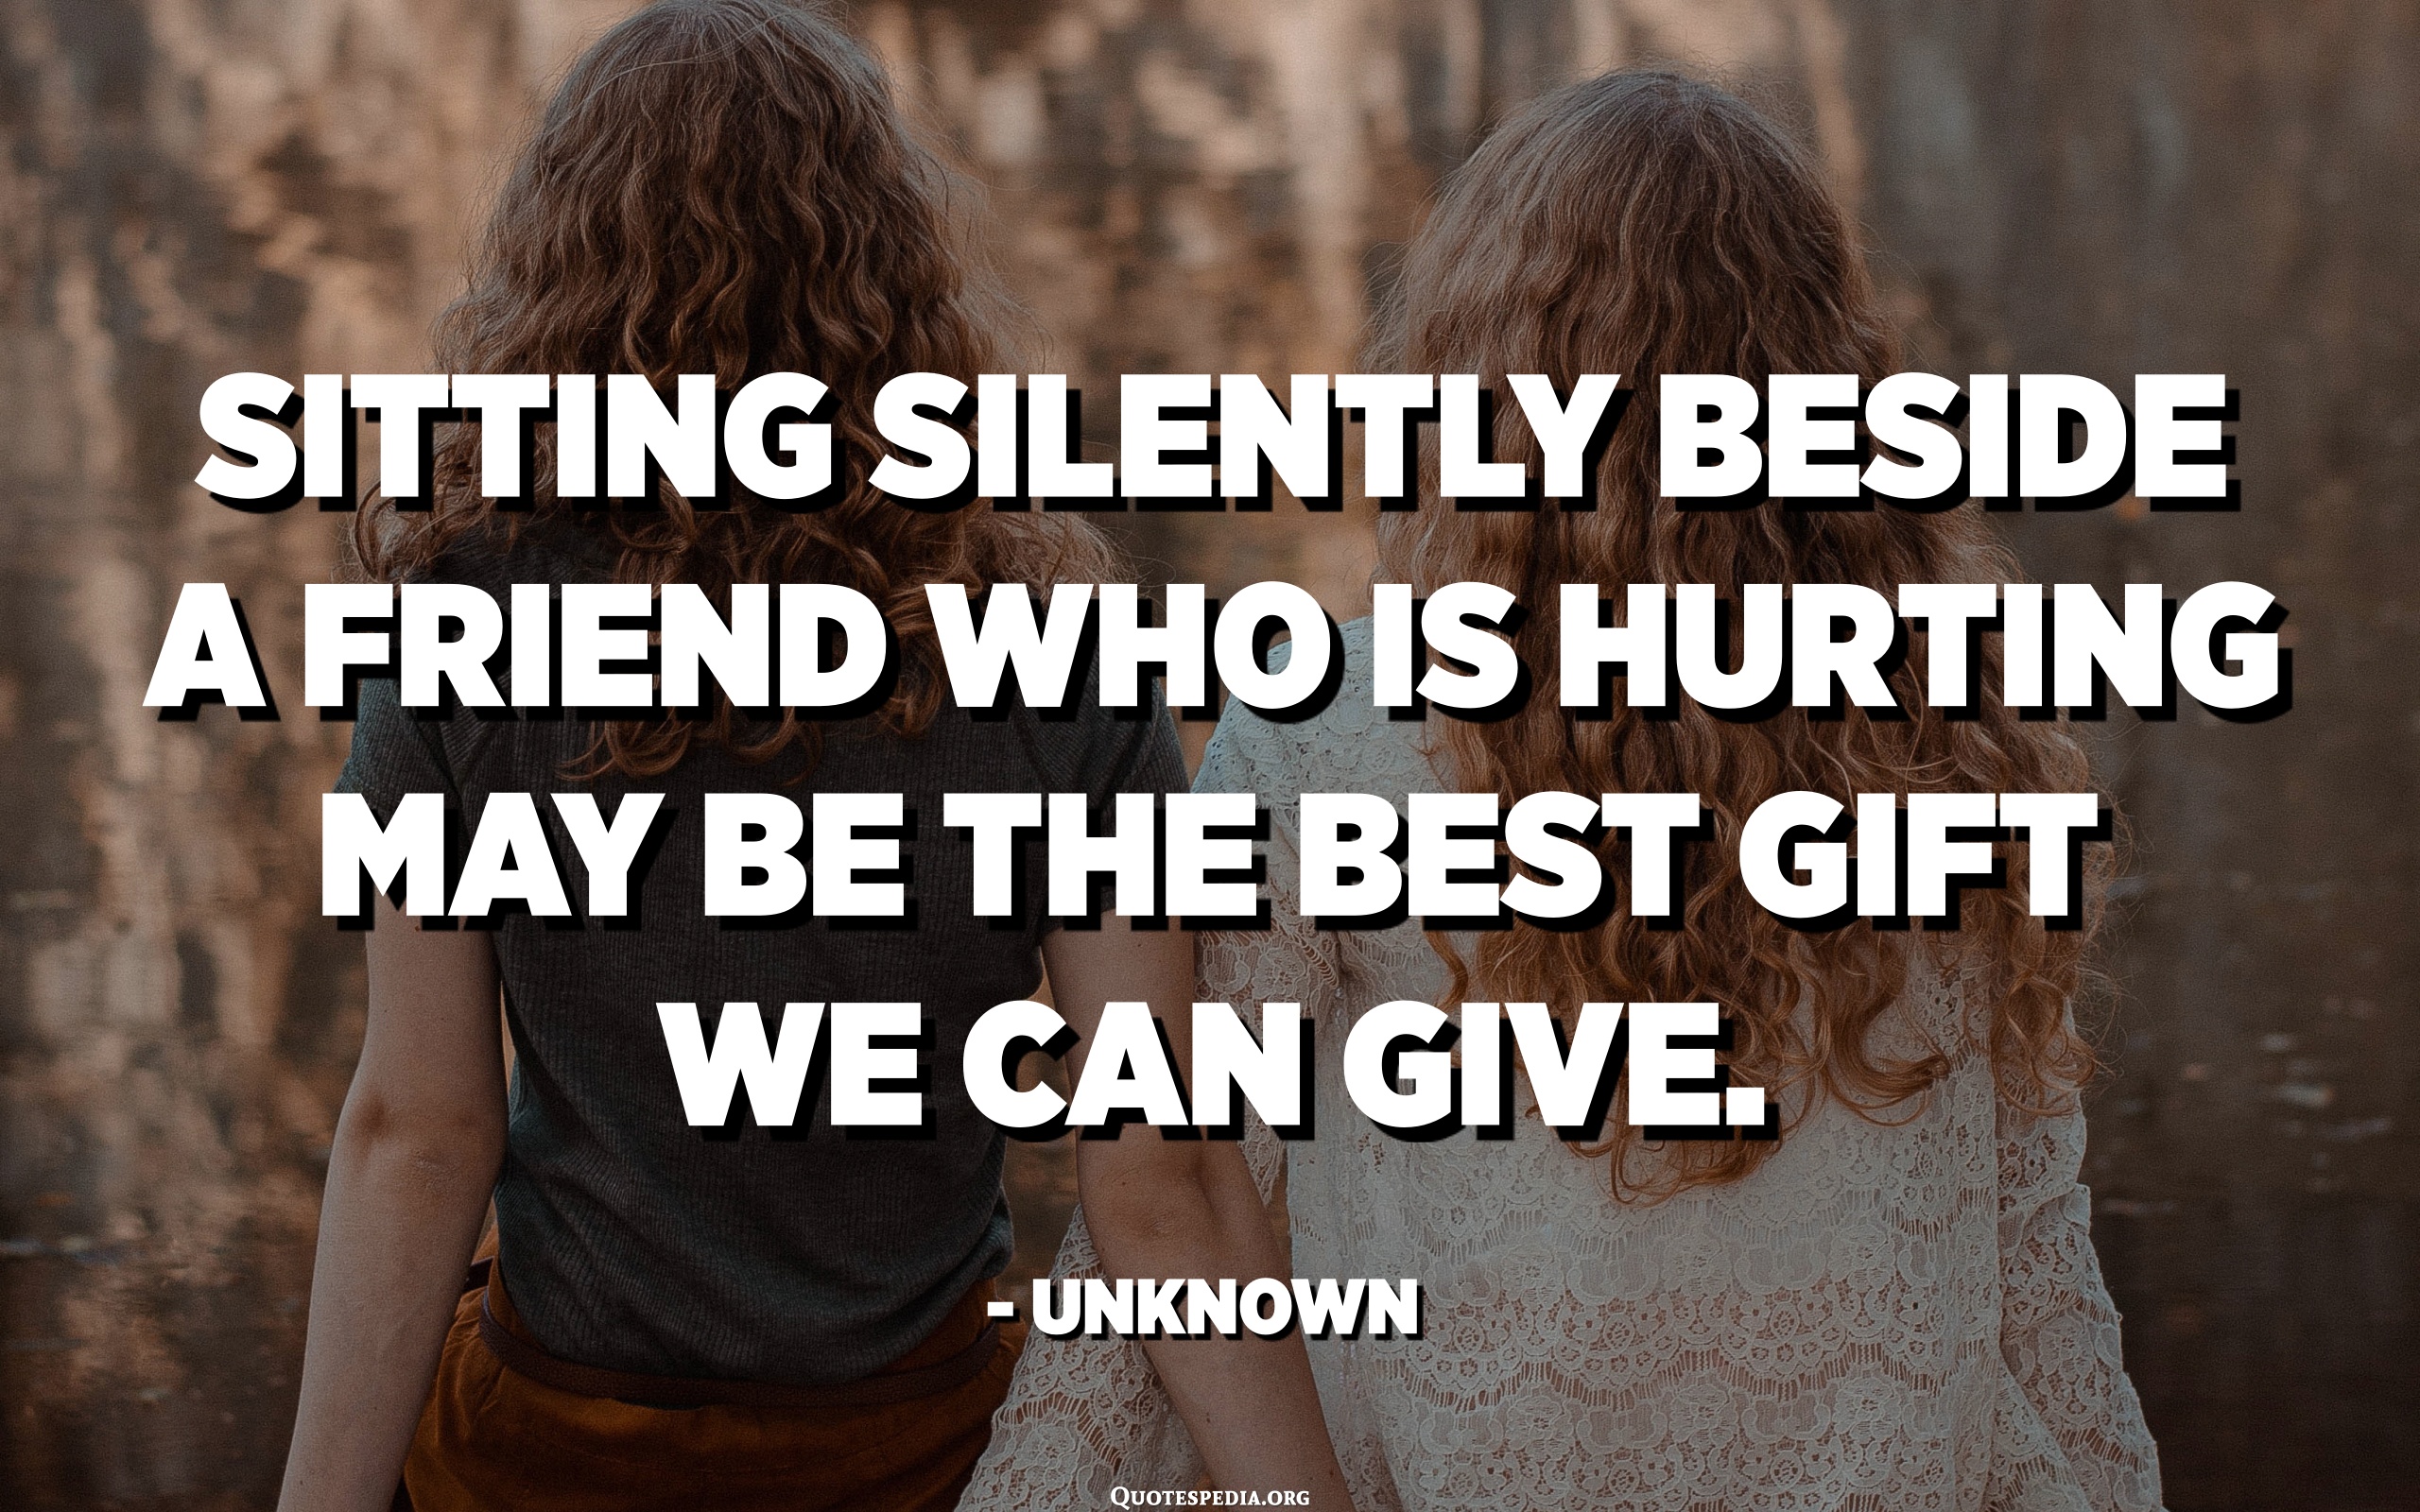 Sitting silently beside a friend who is hurting may be the best gift we can give